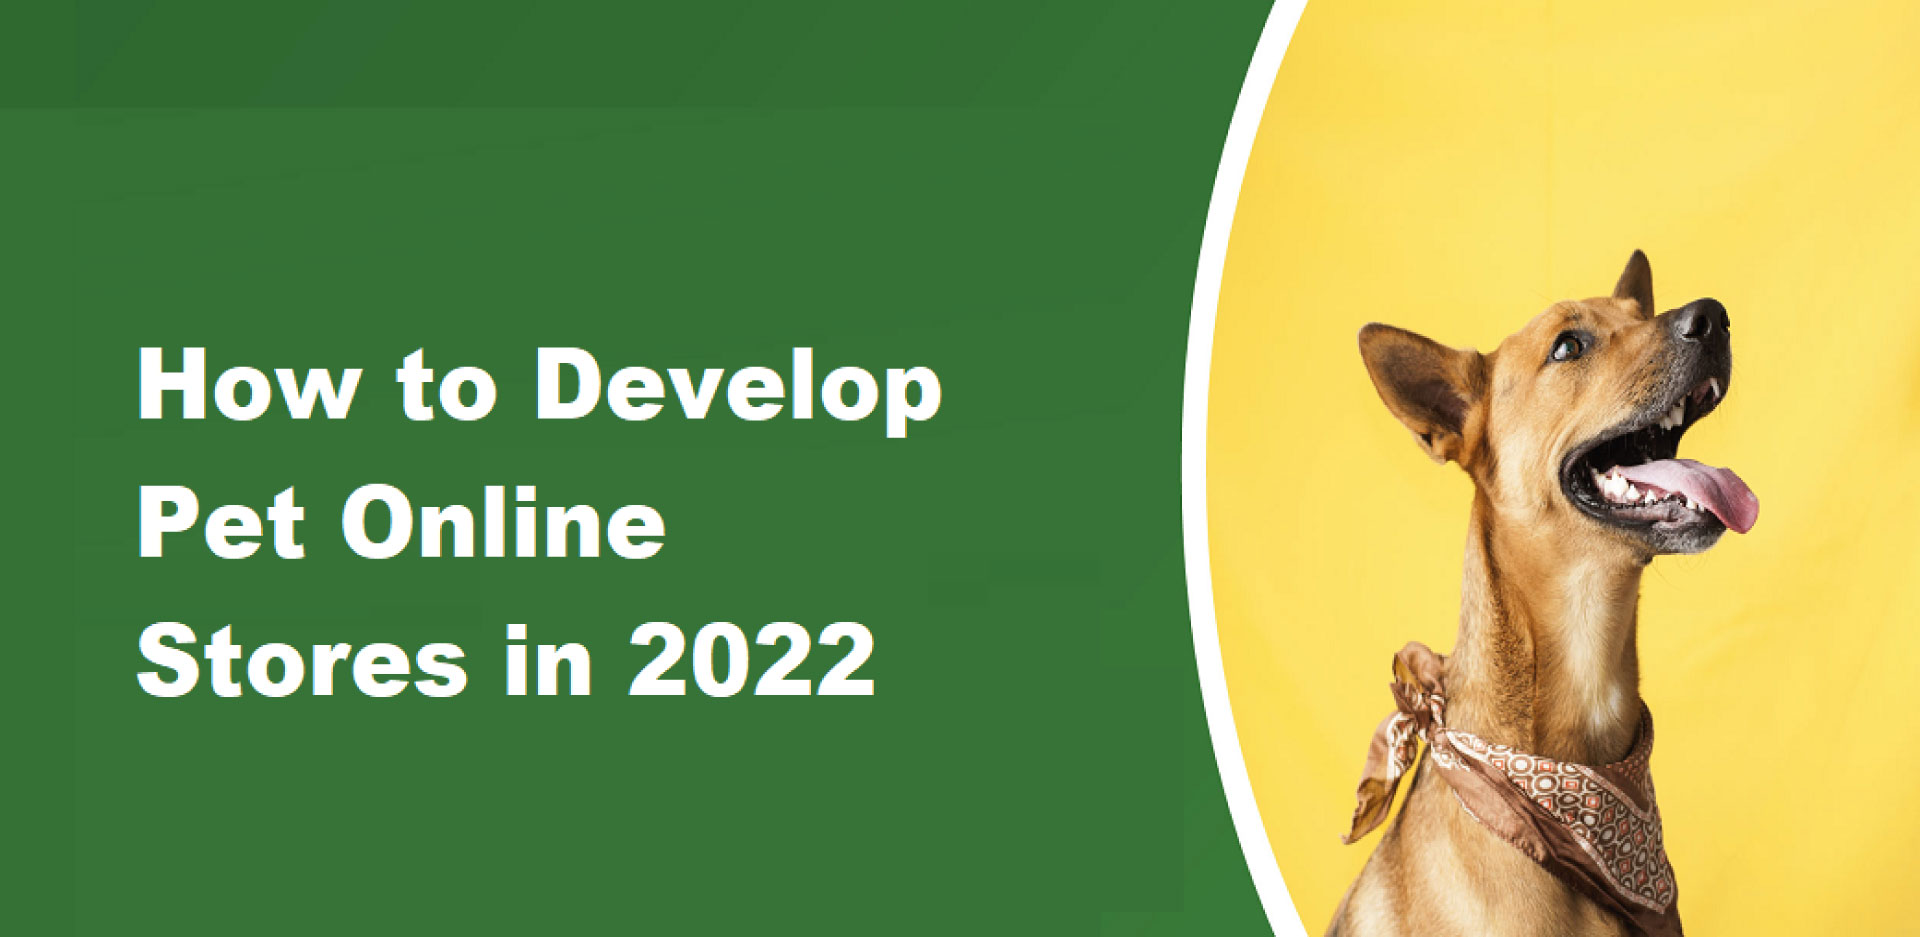 How to Develop Pet Online Stores in 2022